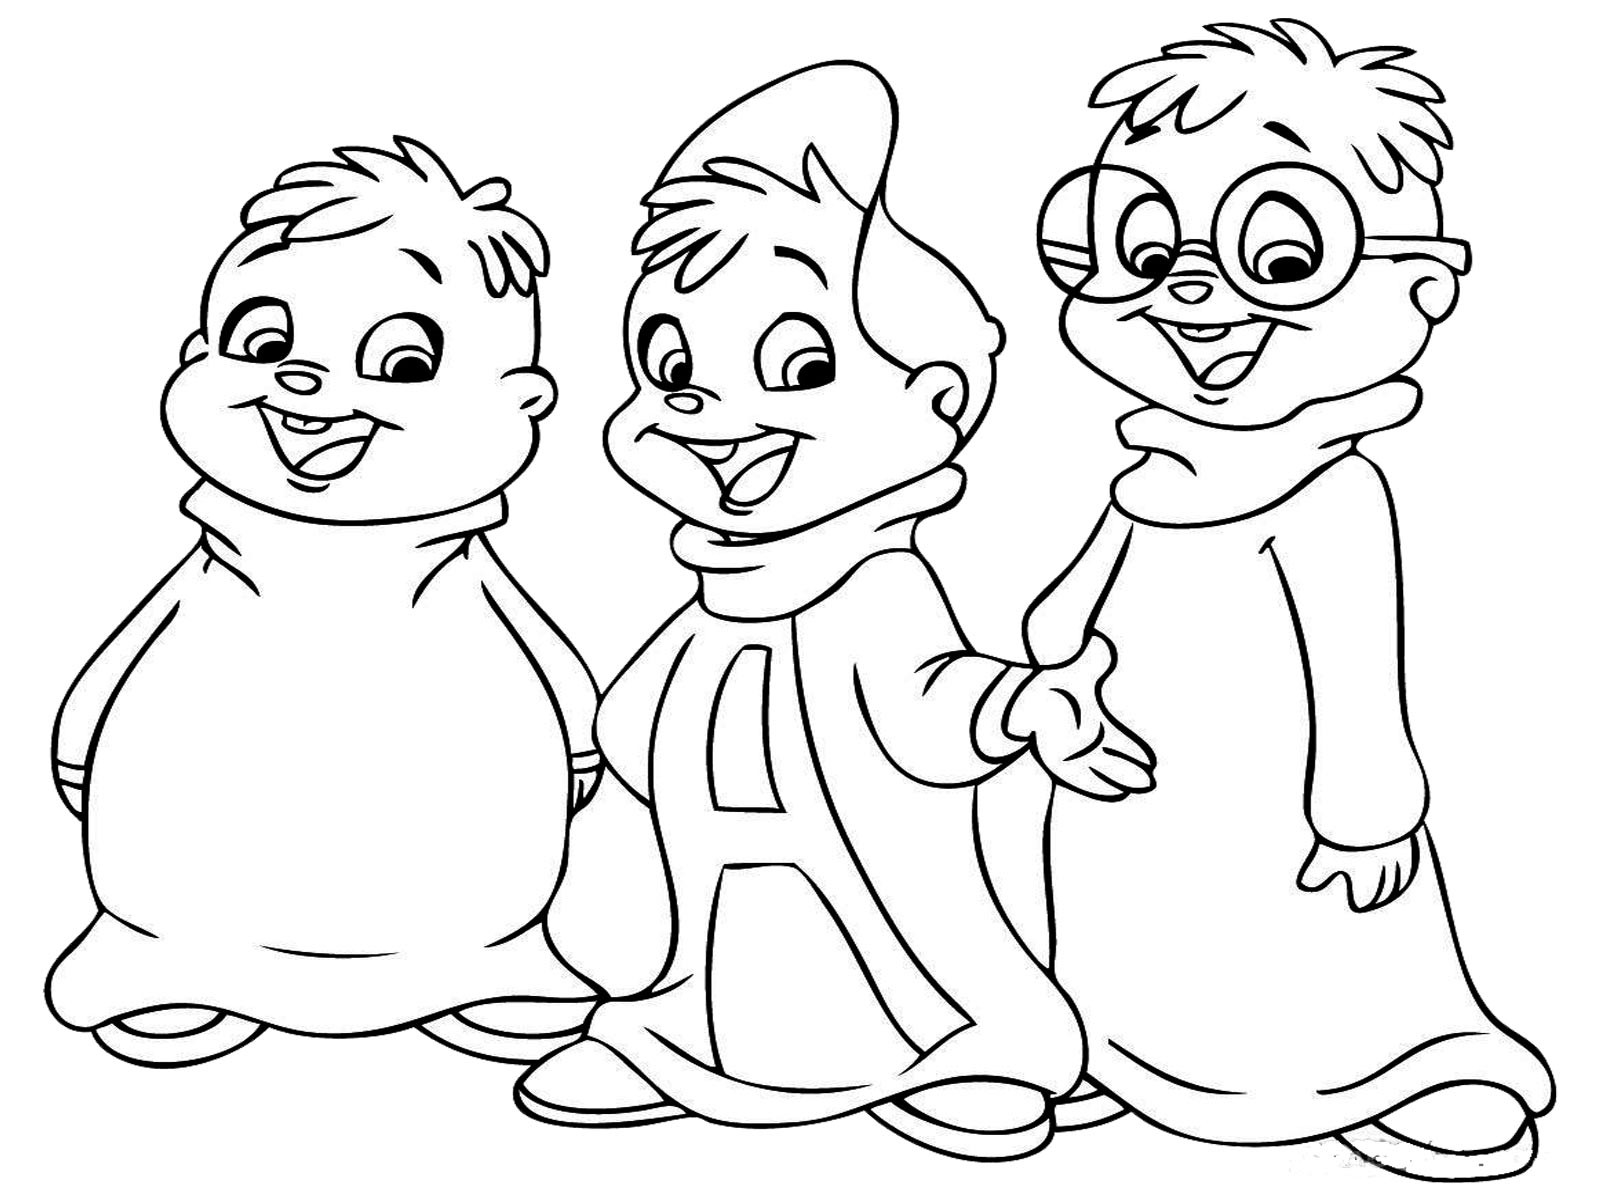 Boys Printable Coloring Pages
 Coloring Pages for Boys 2018 Dr Odd